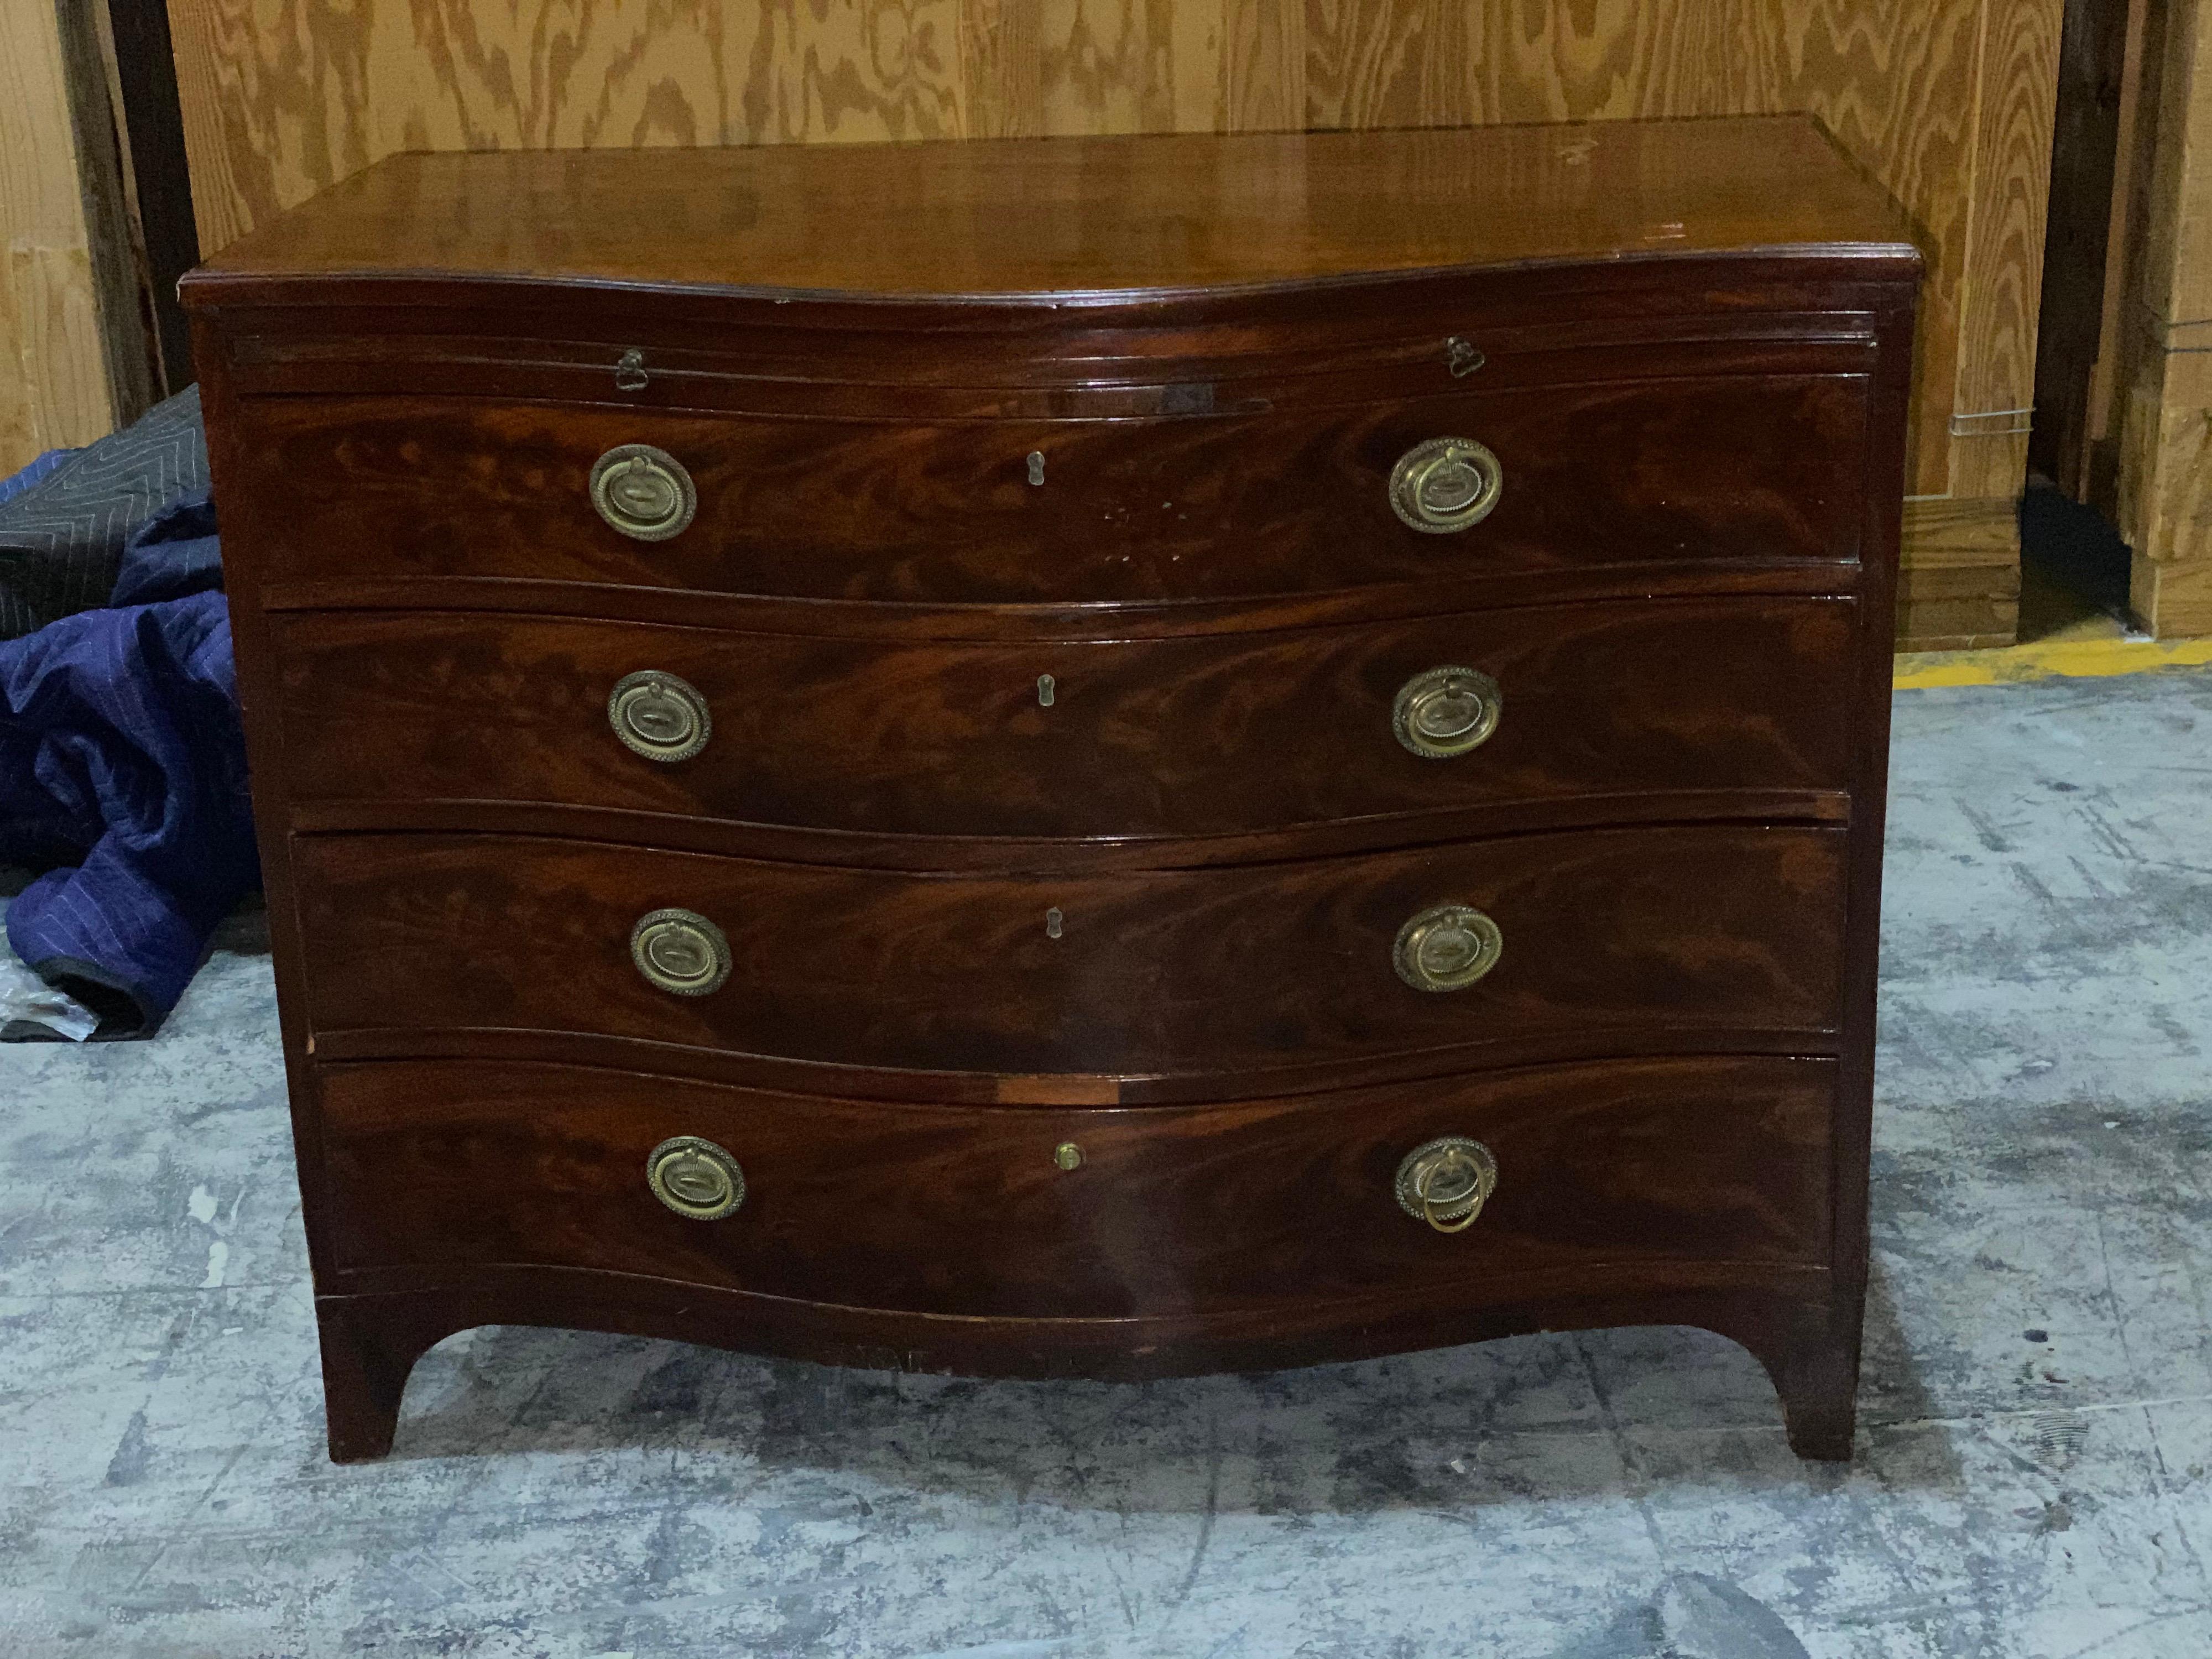 George II serpentine chest of drawers. This Georgian chest of drawers is made from a beautiful walnut wood. Stunning curved frame, molded edged top over 4 drawers and an additional pull out tray.

Condition:
Has visible gouges on the top and